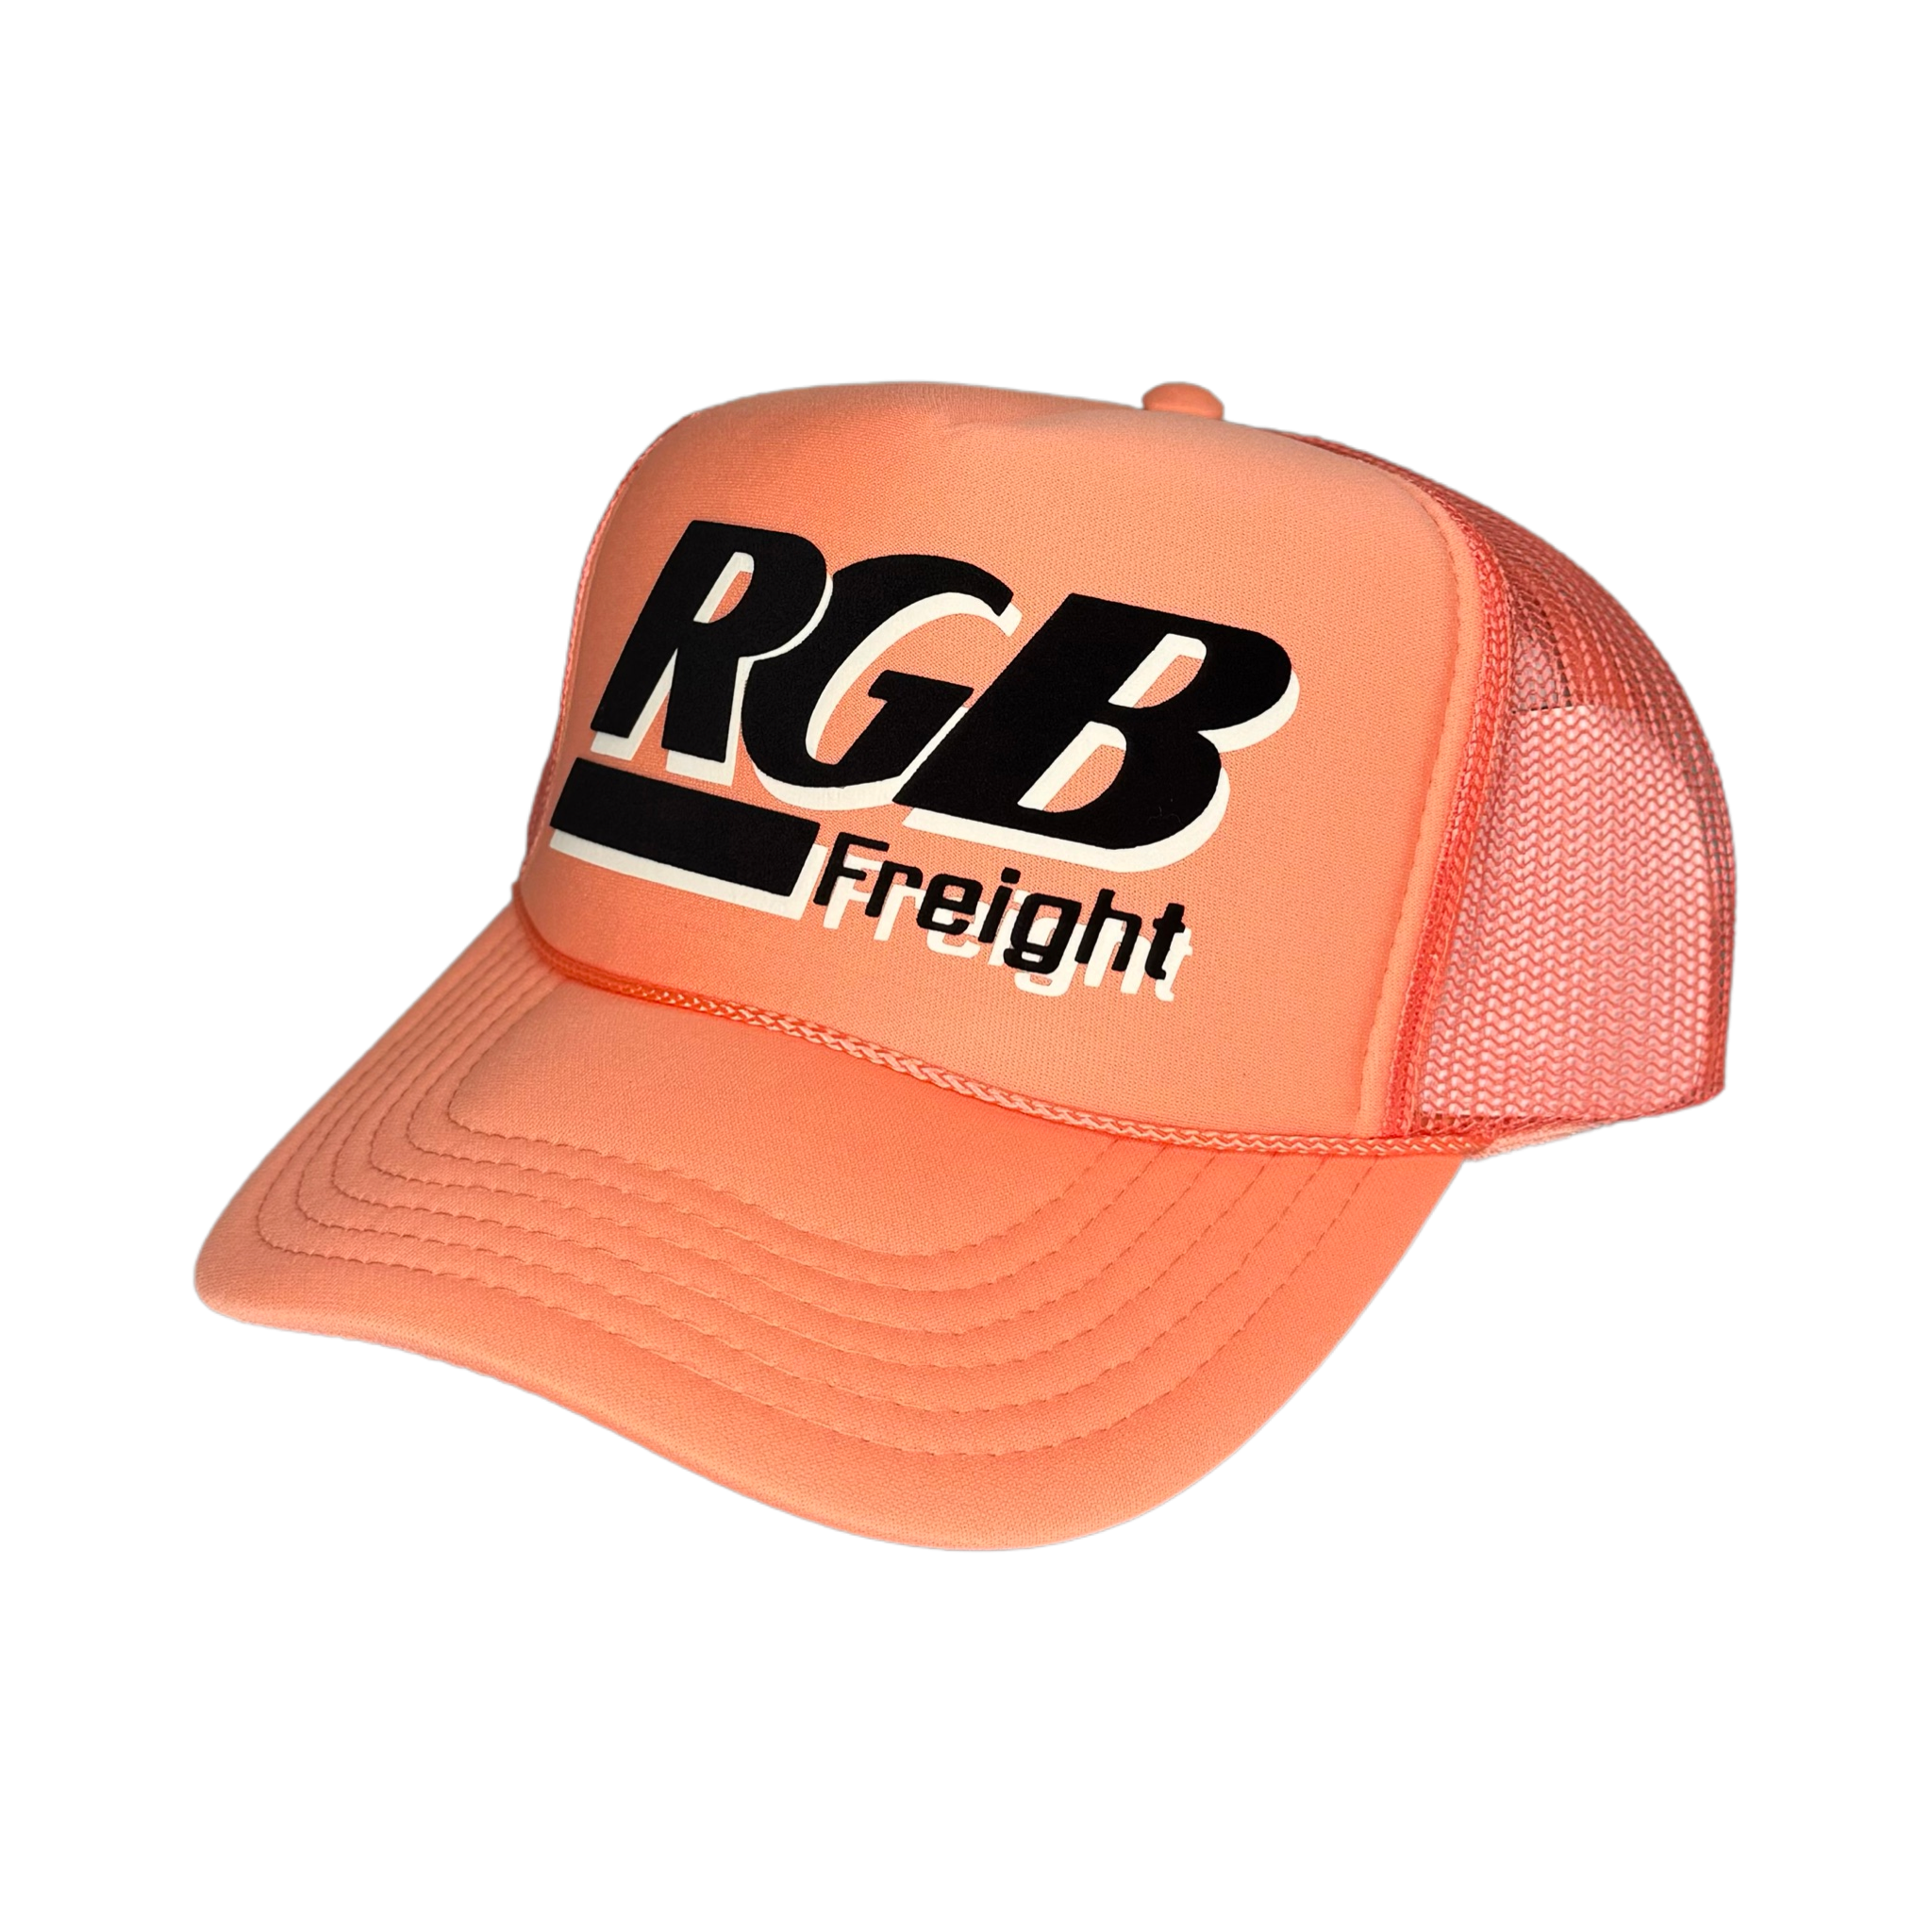 RGB FREIGHT TRUCKER HAT - REFLECTIVE 1 of 1